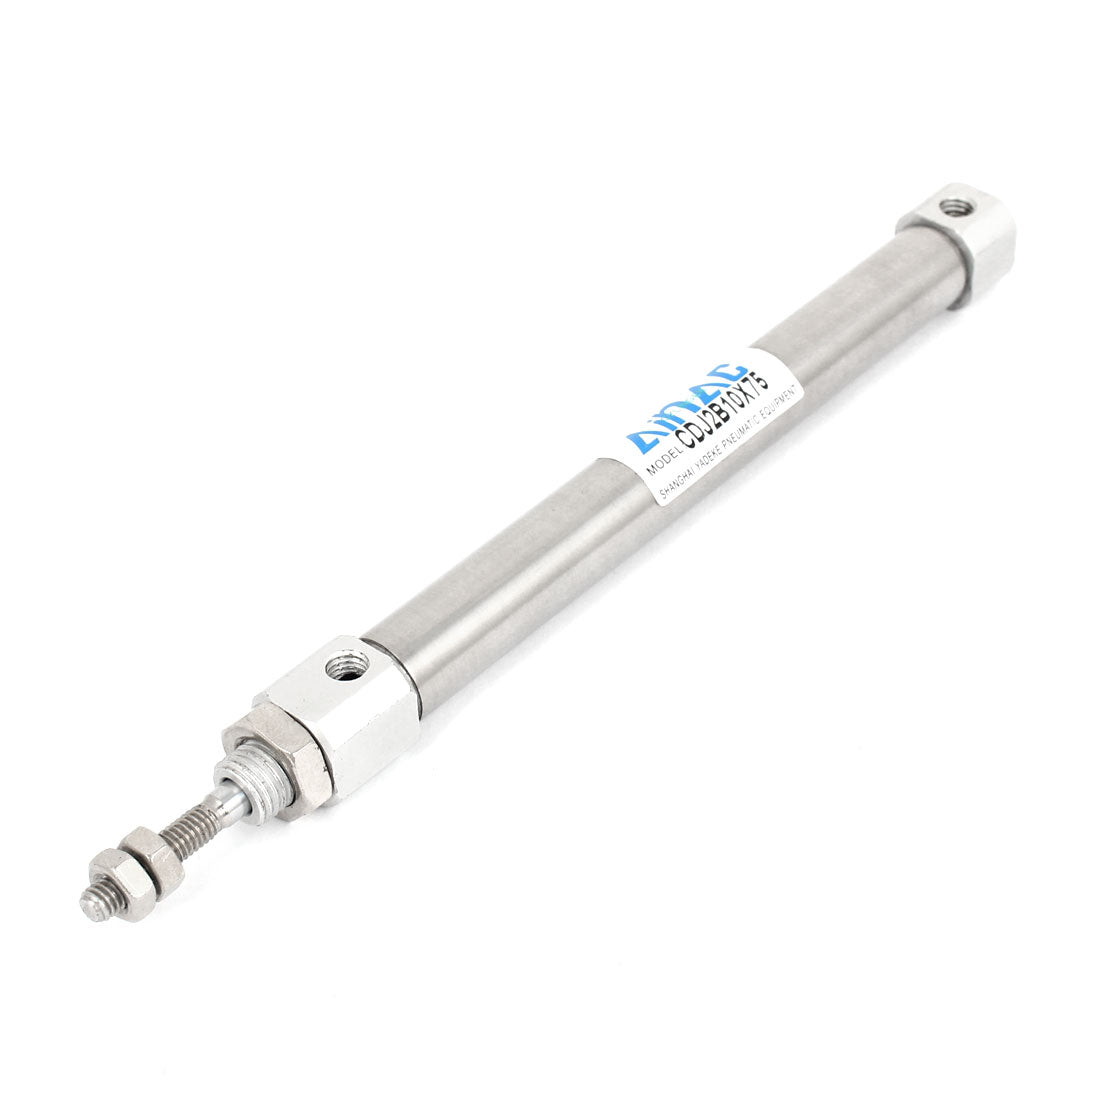 uxcell Uxcell CDJ2B10X75 10mm Bore x 75mm Stroke Motion Control Pneumatic Air Cylinder